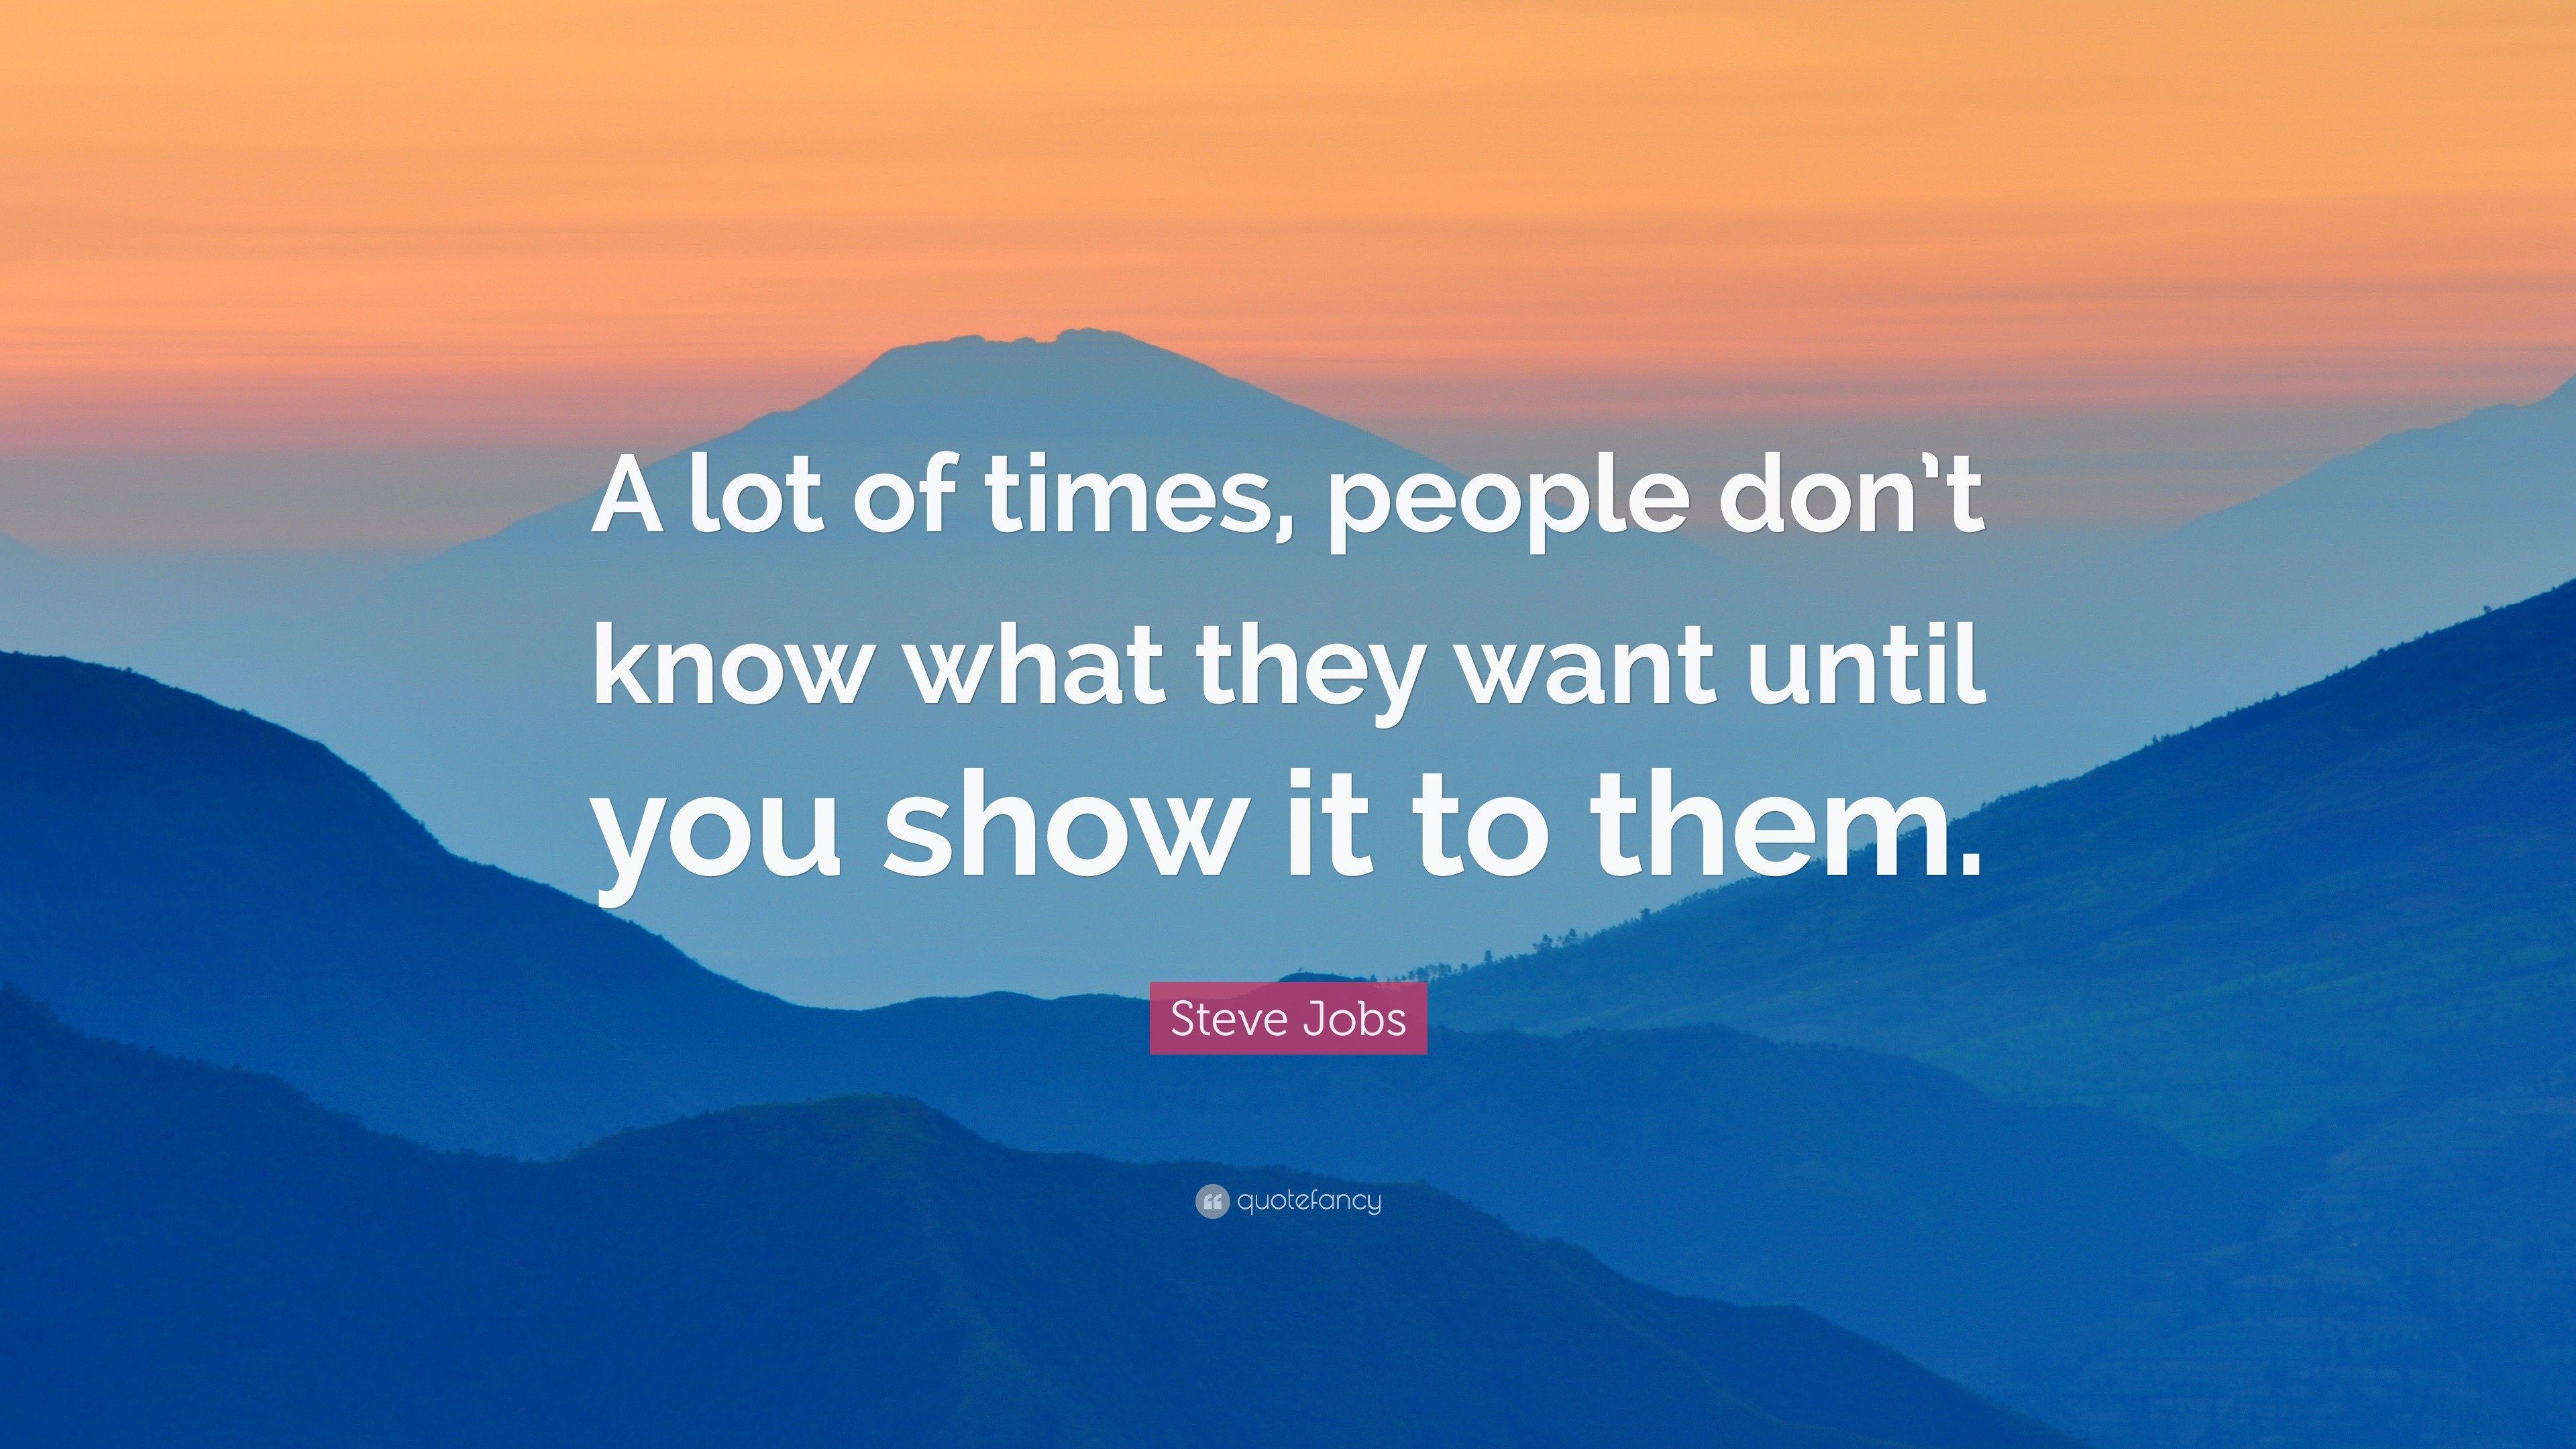 Steve Jobs Quote: “A lot of times, people don’t know what they want